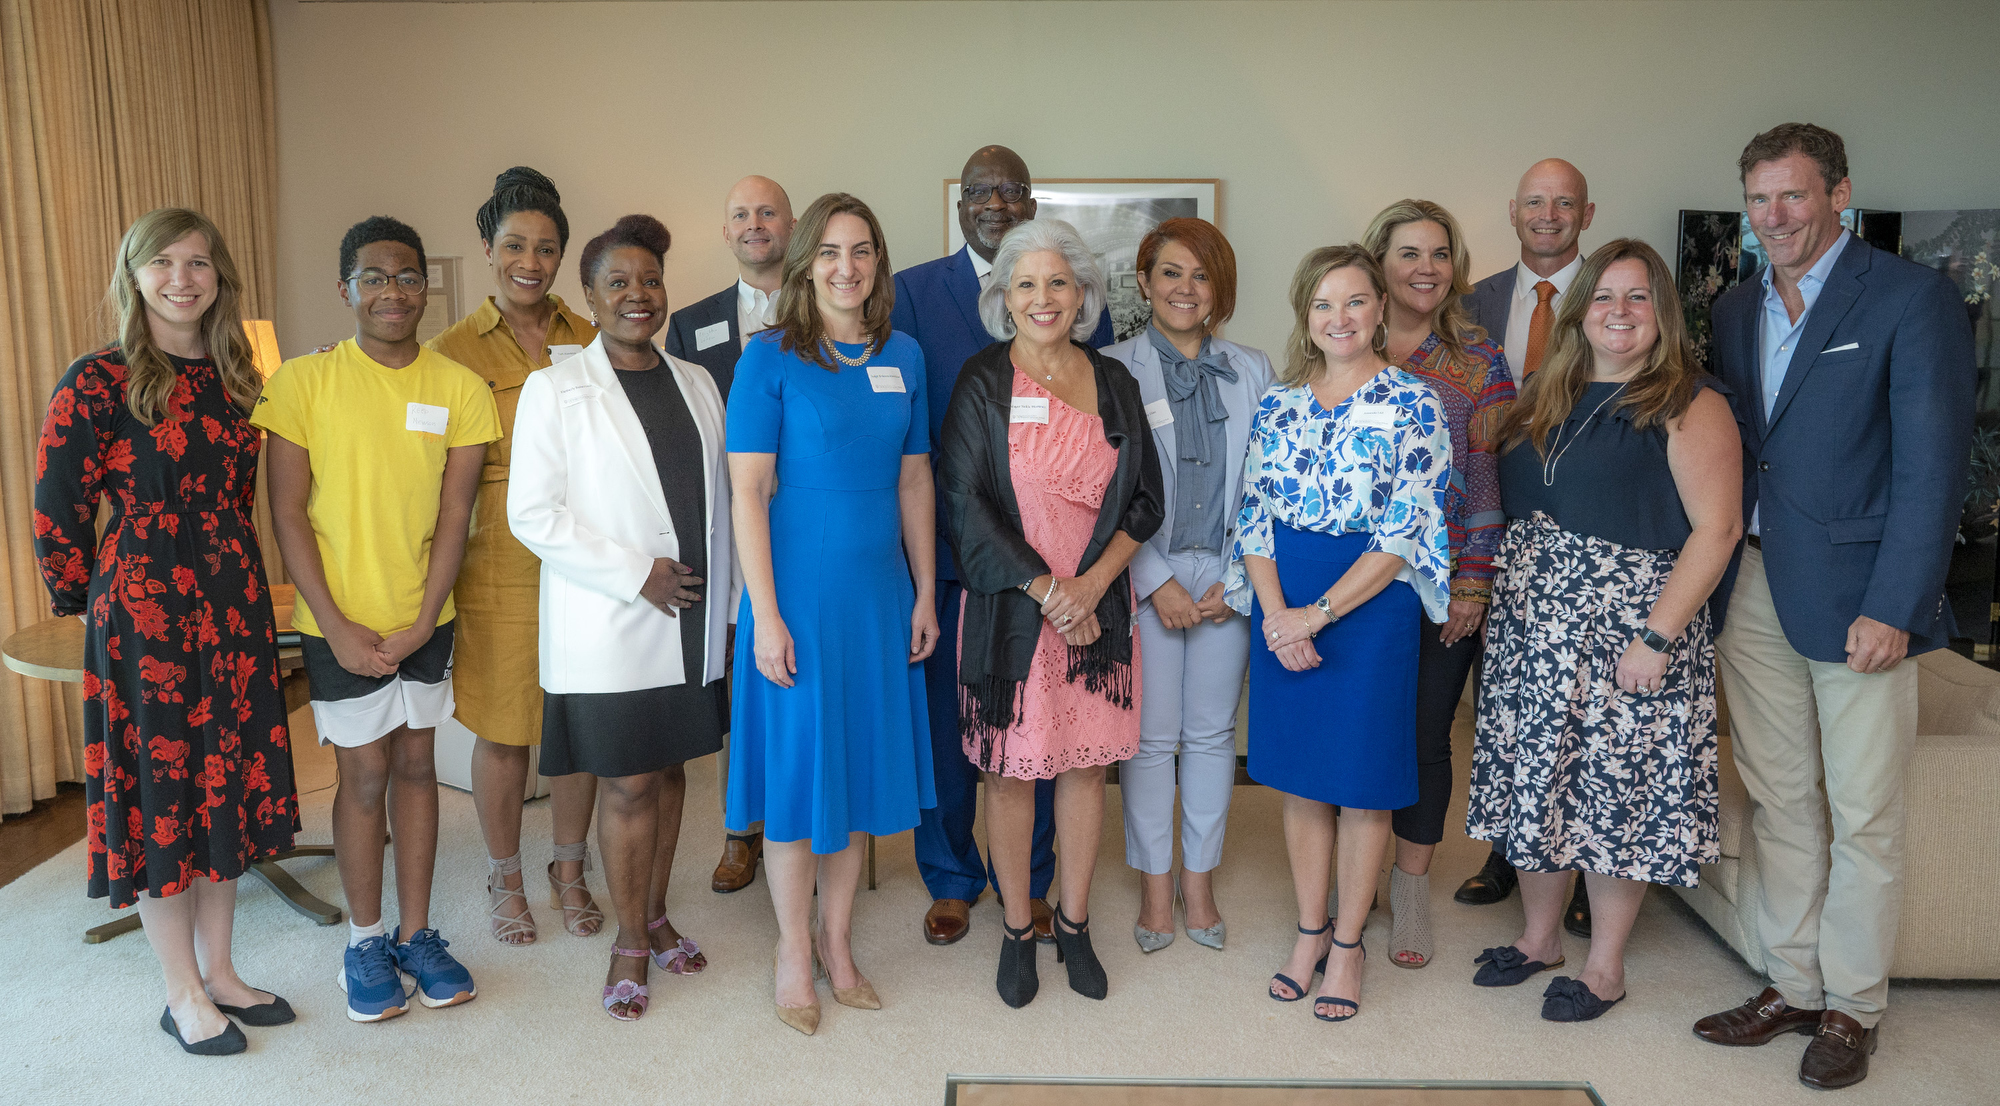 Members of the LBJ Women's Campaign School Founder's Circle with LBJWCS Founder and Executive Director Amy Kroll (far left) and LBJ Foundation President and historian Mark Updegrove (far right) at the LBJ Presidential Library.